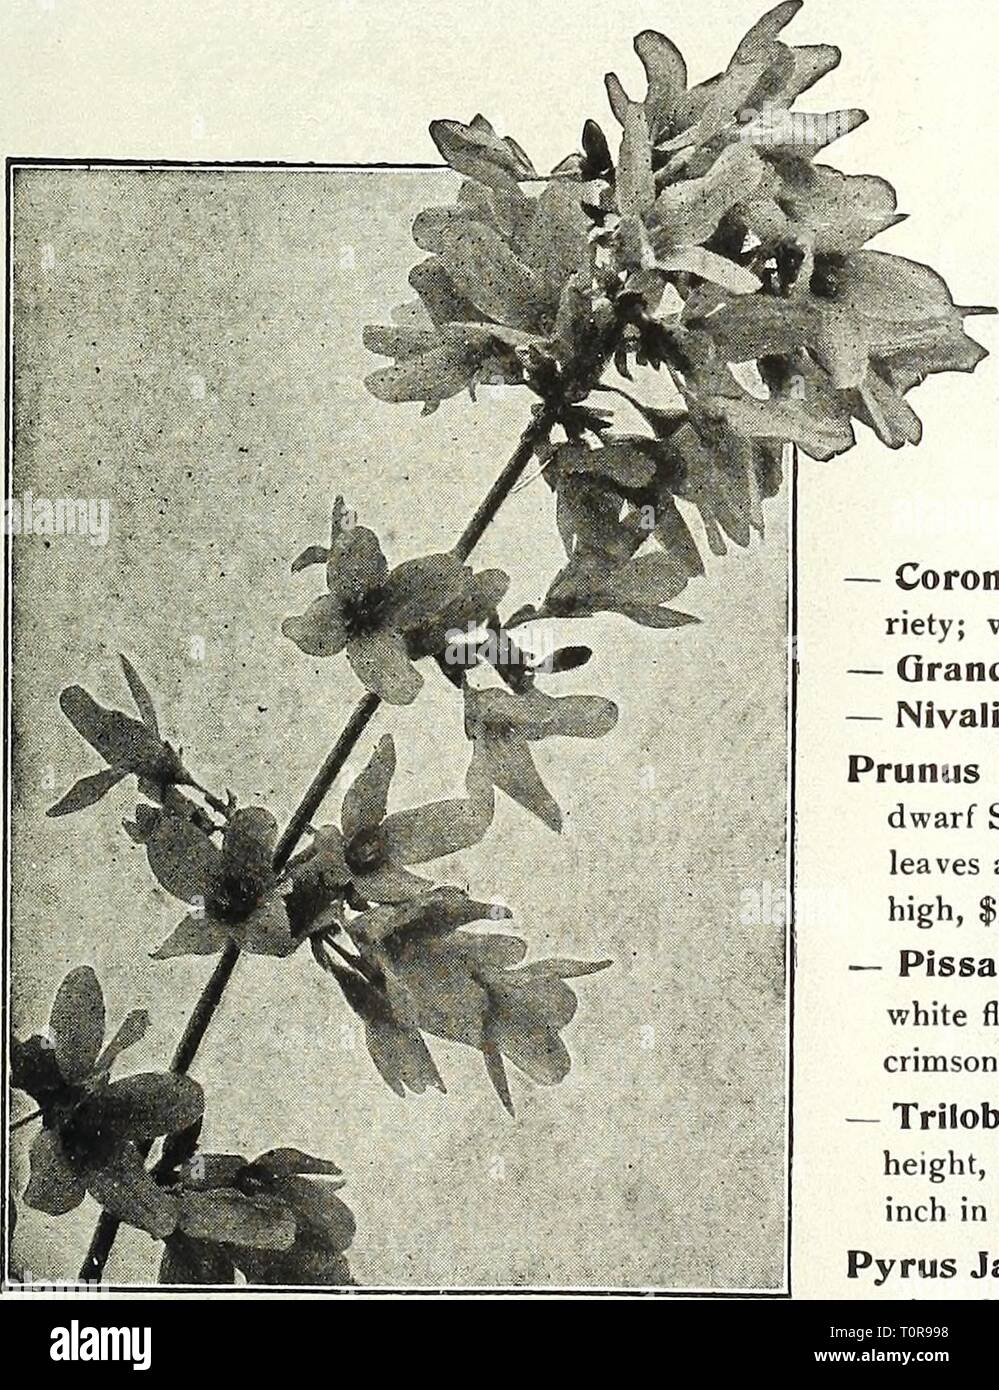 Dreer's bulbs 1921 (1921) Dreer's bulbs 1921  dreersbulbs19211921henr Year: 1921  HYDRANGEA Paniculata Grandiflora    Forsythia Ligustrum Ovalifolium Aureum (Oolden-leaved Pri- vet), A beautiful golden variegated form and very effective for associating with other dwarf shrubs. 60 cts. each. — Ovalifolium (California Privet). See page 53. Lilacs. See Syringa, page 52. Loniceras (Bush Iloneyauckles). •— Ledebouri. A vigorous-growing Shrub with red flowers in May. 60 cts. each. — Tatarica (Tartarian Iloneijsuckle). Pink flowers, contrasting beautifully with the foliage; blooms in June. 60 cts. ea Stock Photo